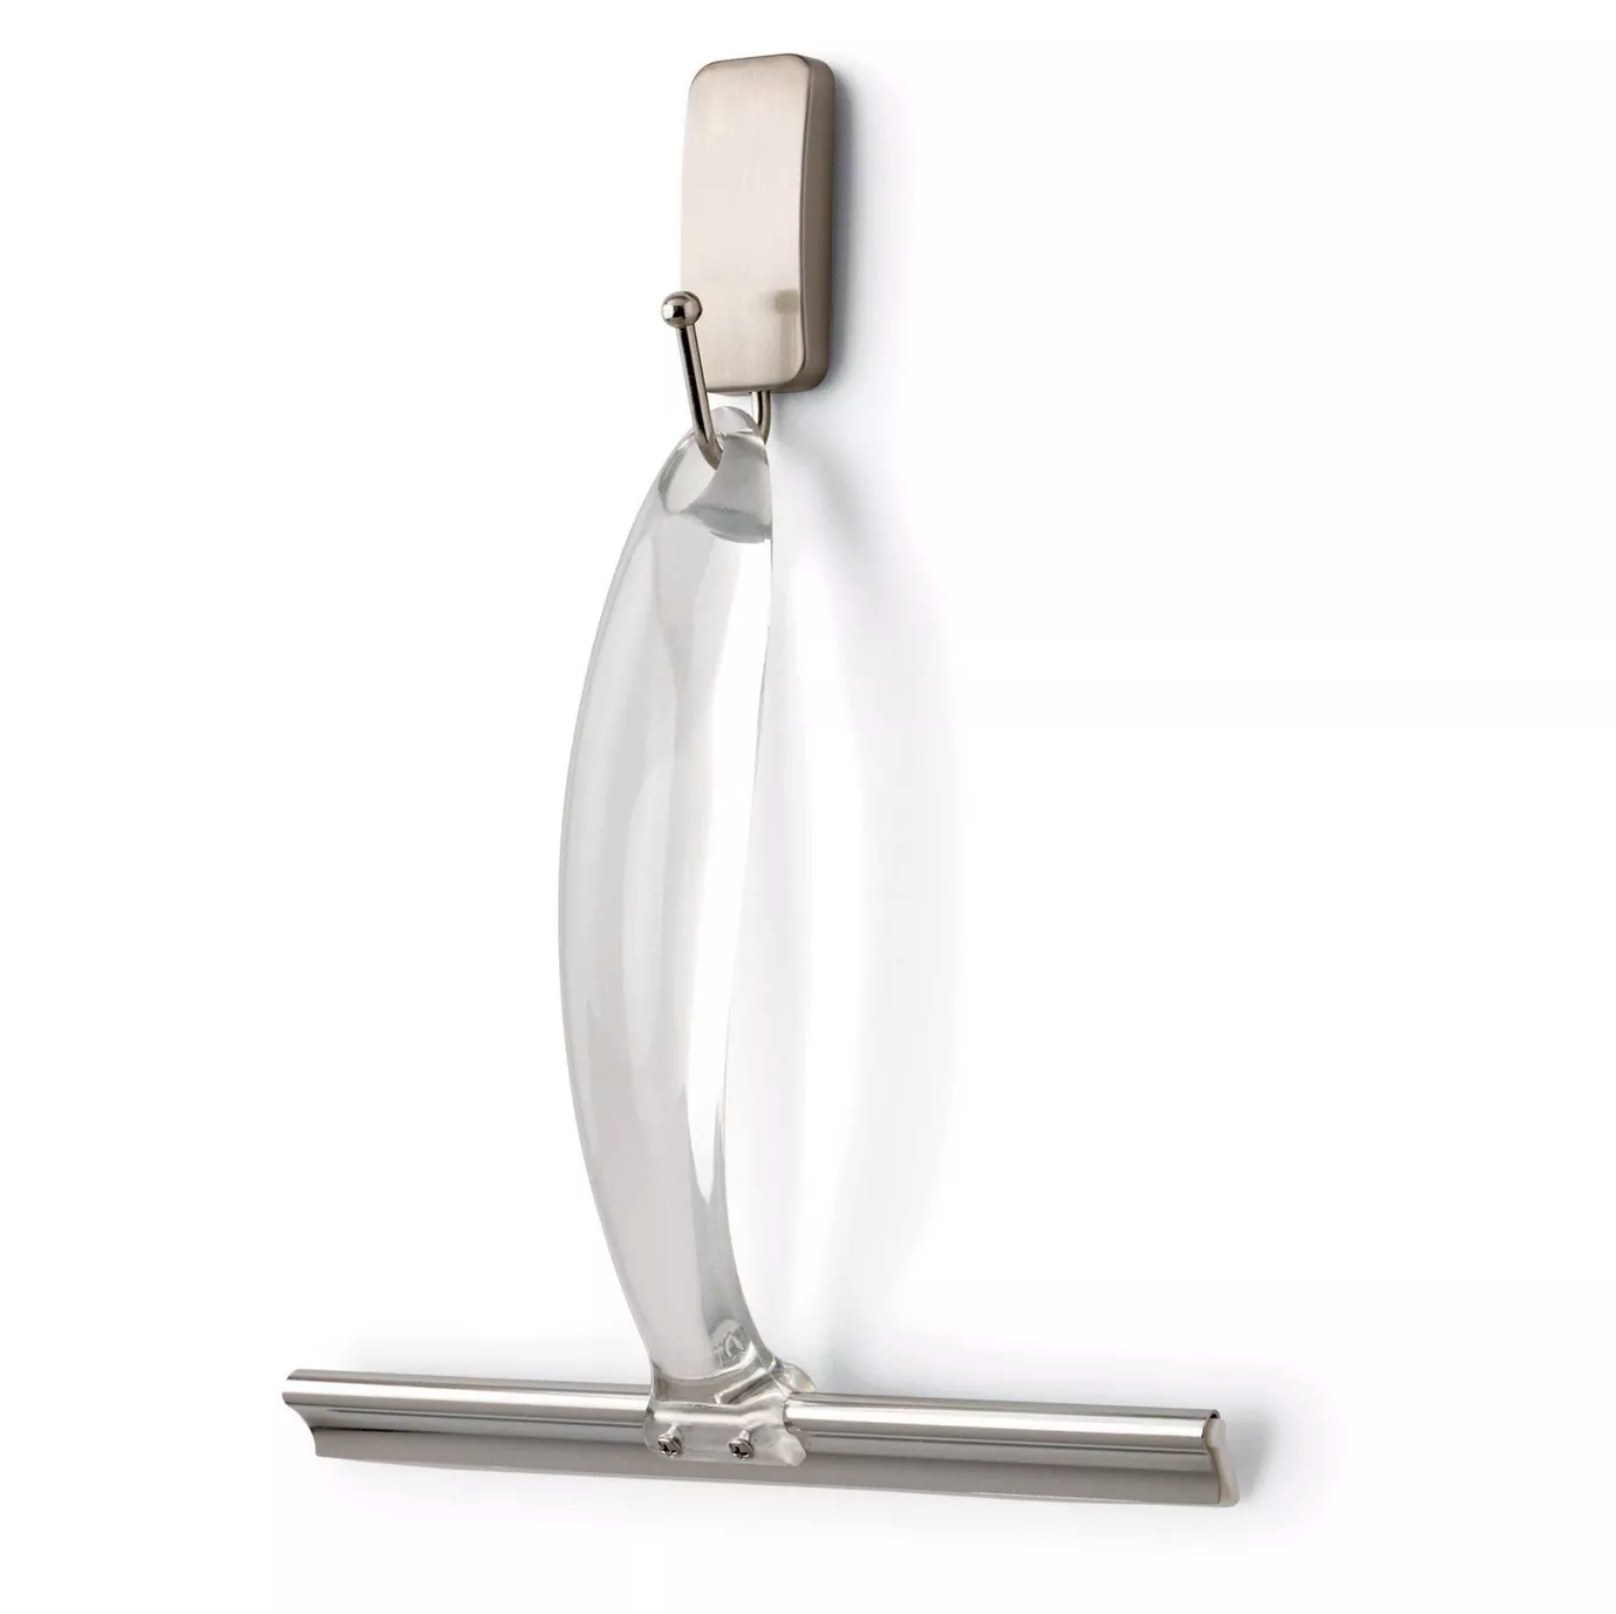 Silver squeegee hanging on a silver wall hook